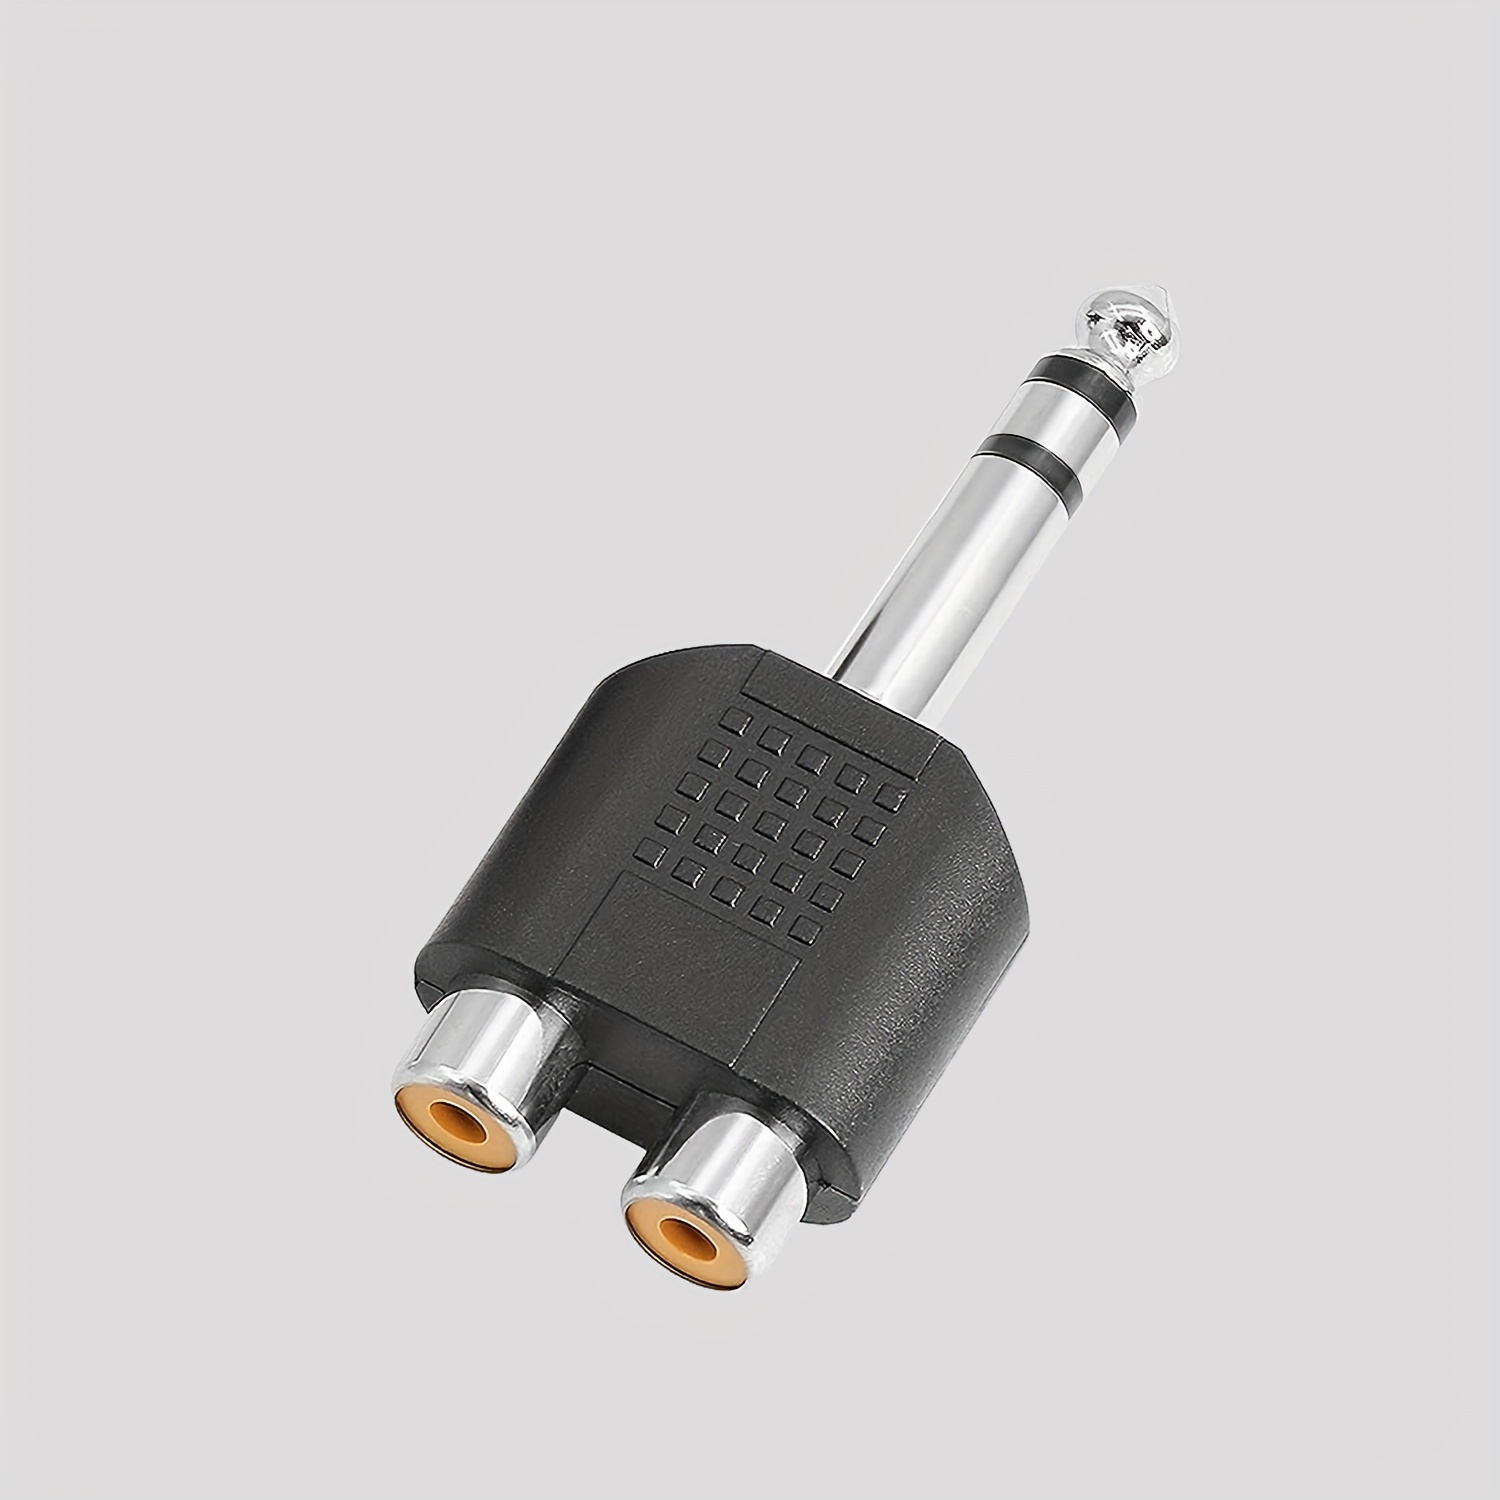 3 RCA Cable (50 FT) - 3RCA AV RCA Composite Video + 2RCA Stereo Audio M/M  Male to Male Dual Shielded RCA Connector Plug Jack Wire Cord